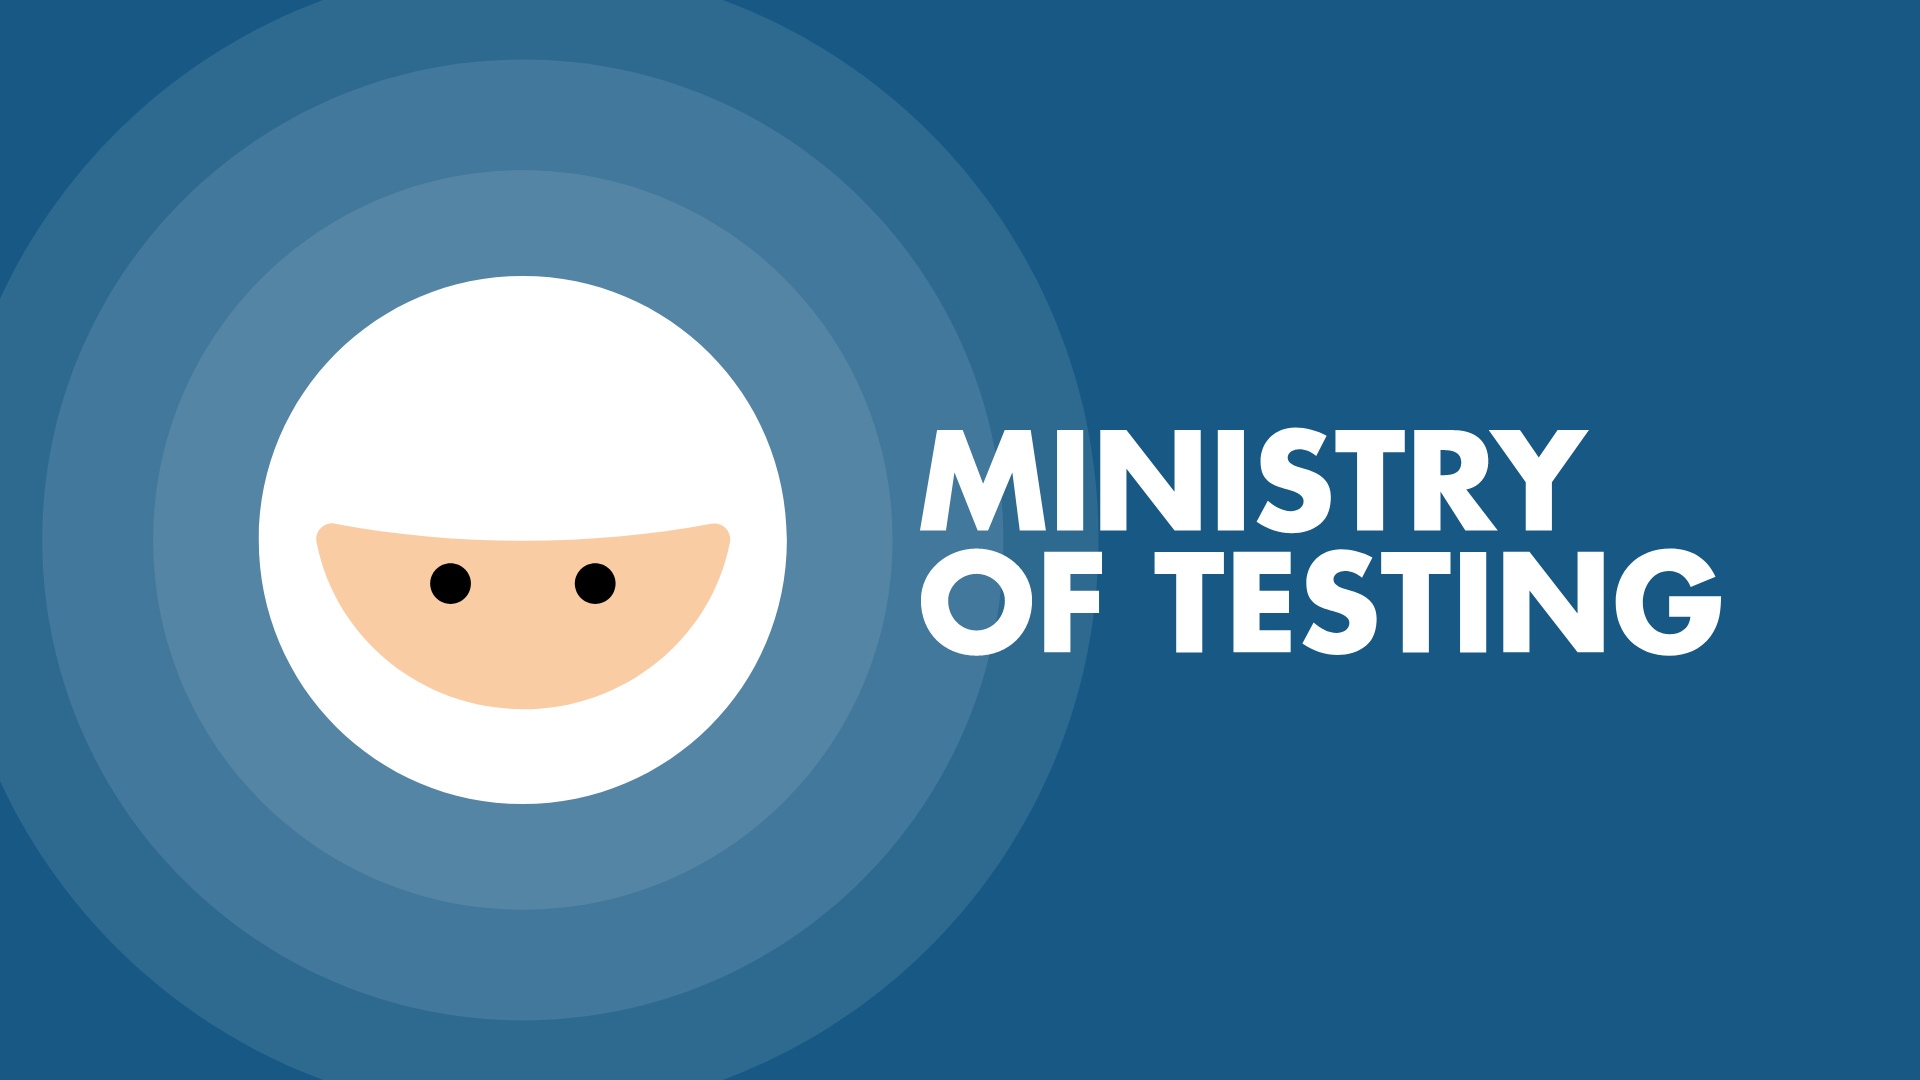 How I Became A Sole Software Tester And How The Ministry of Testing Continuously Makes Me a Better Tester